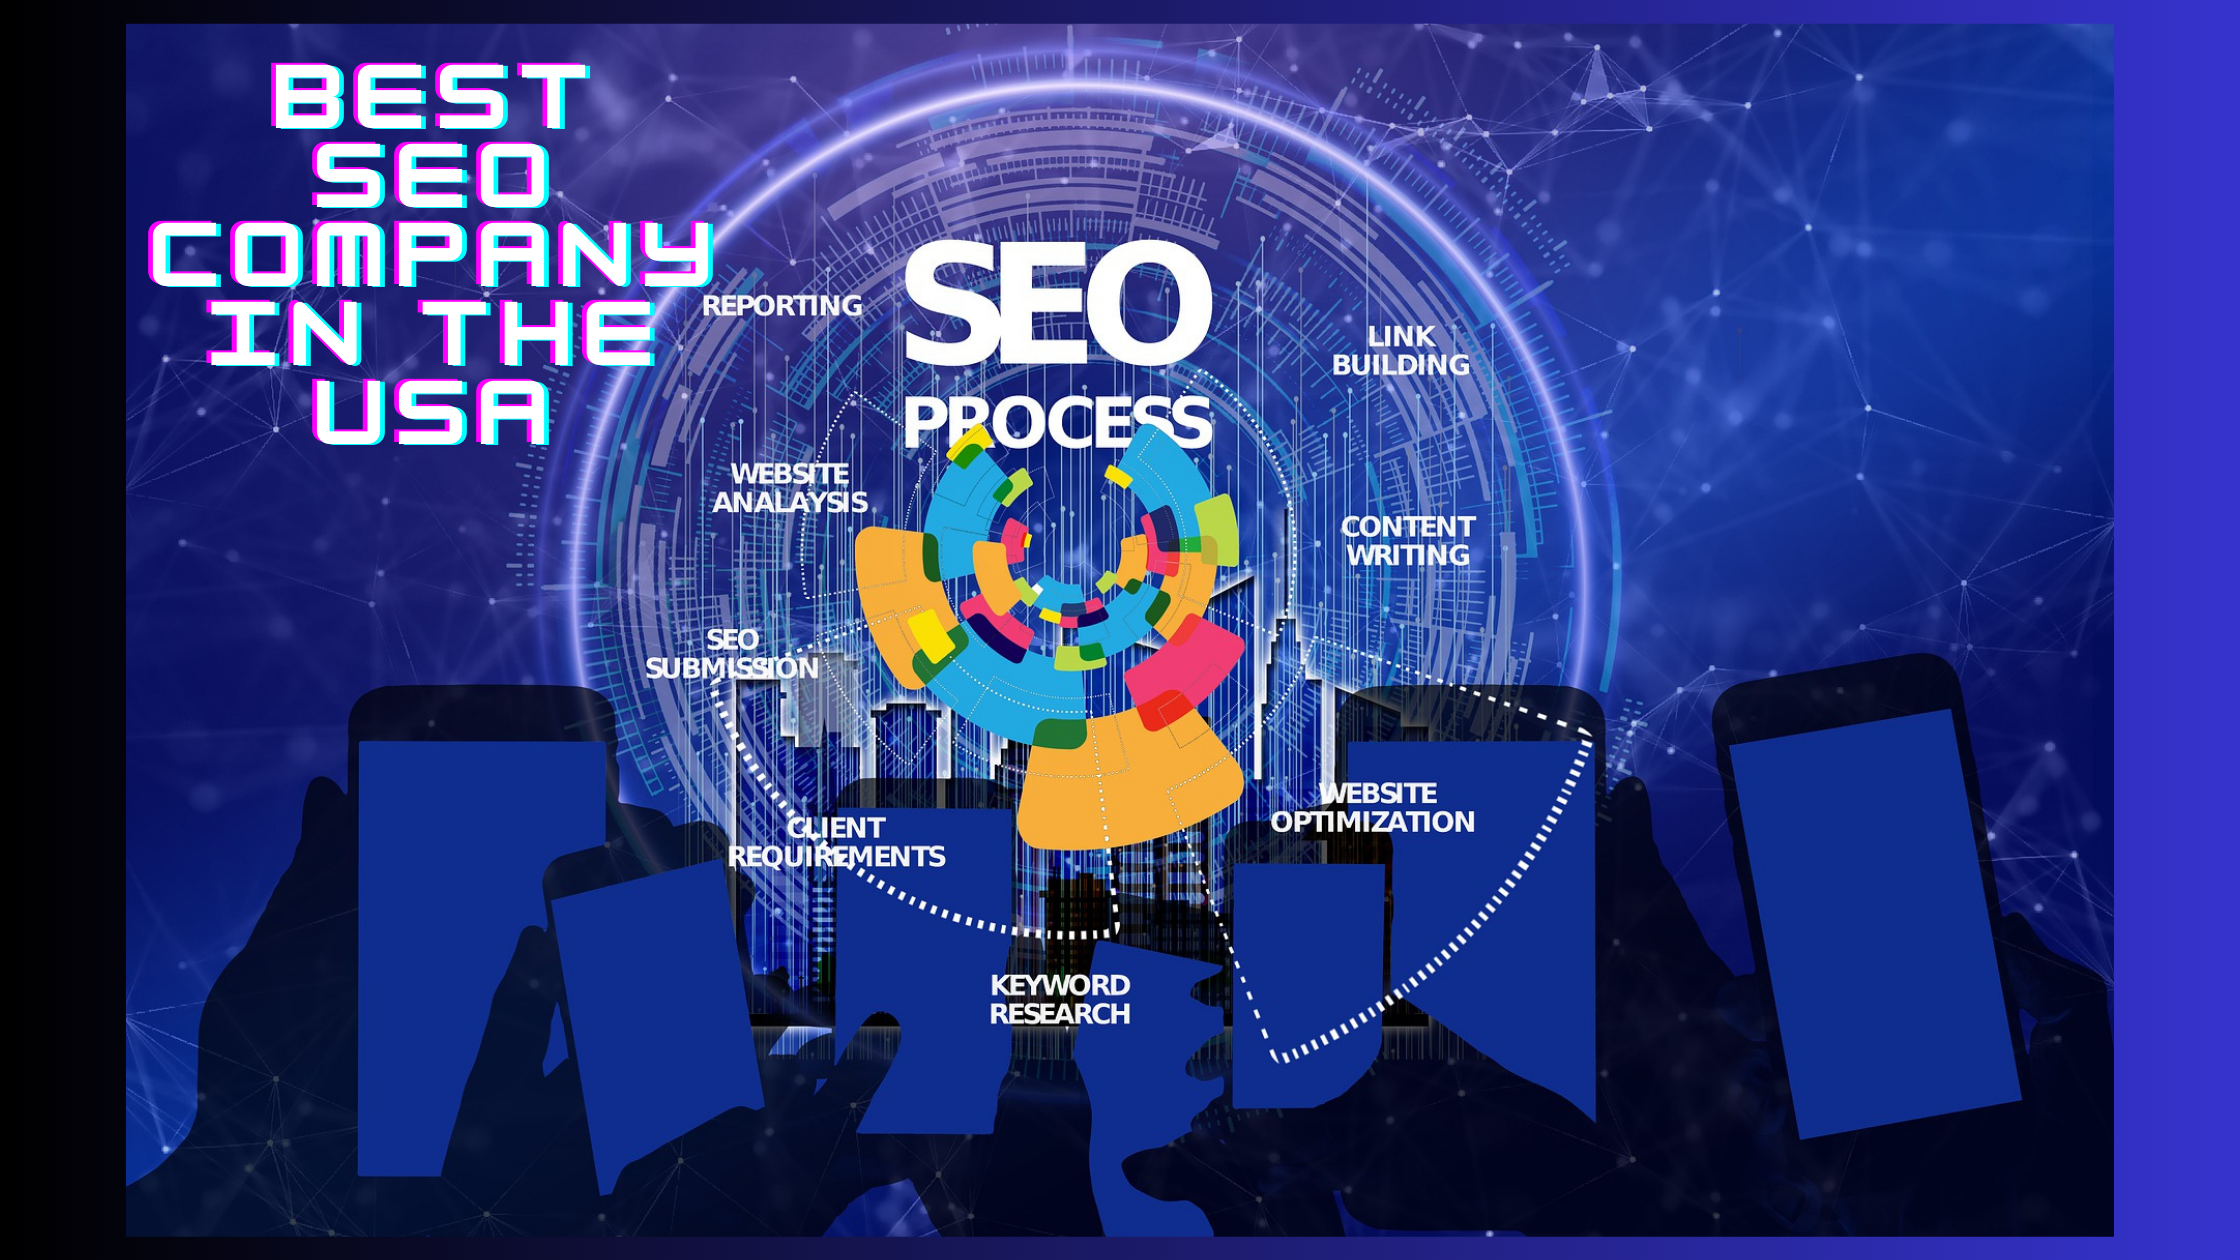 Best SEO Company in the USA